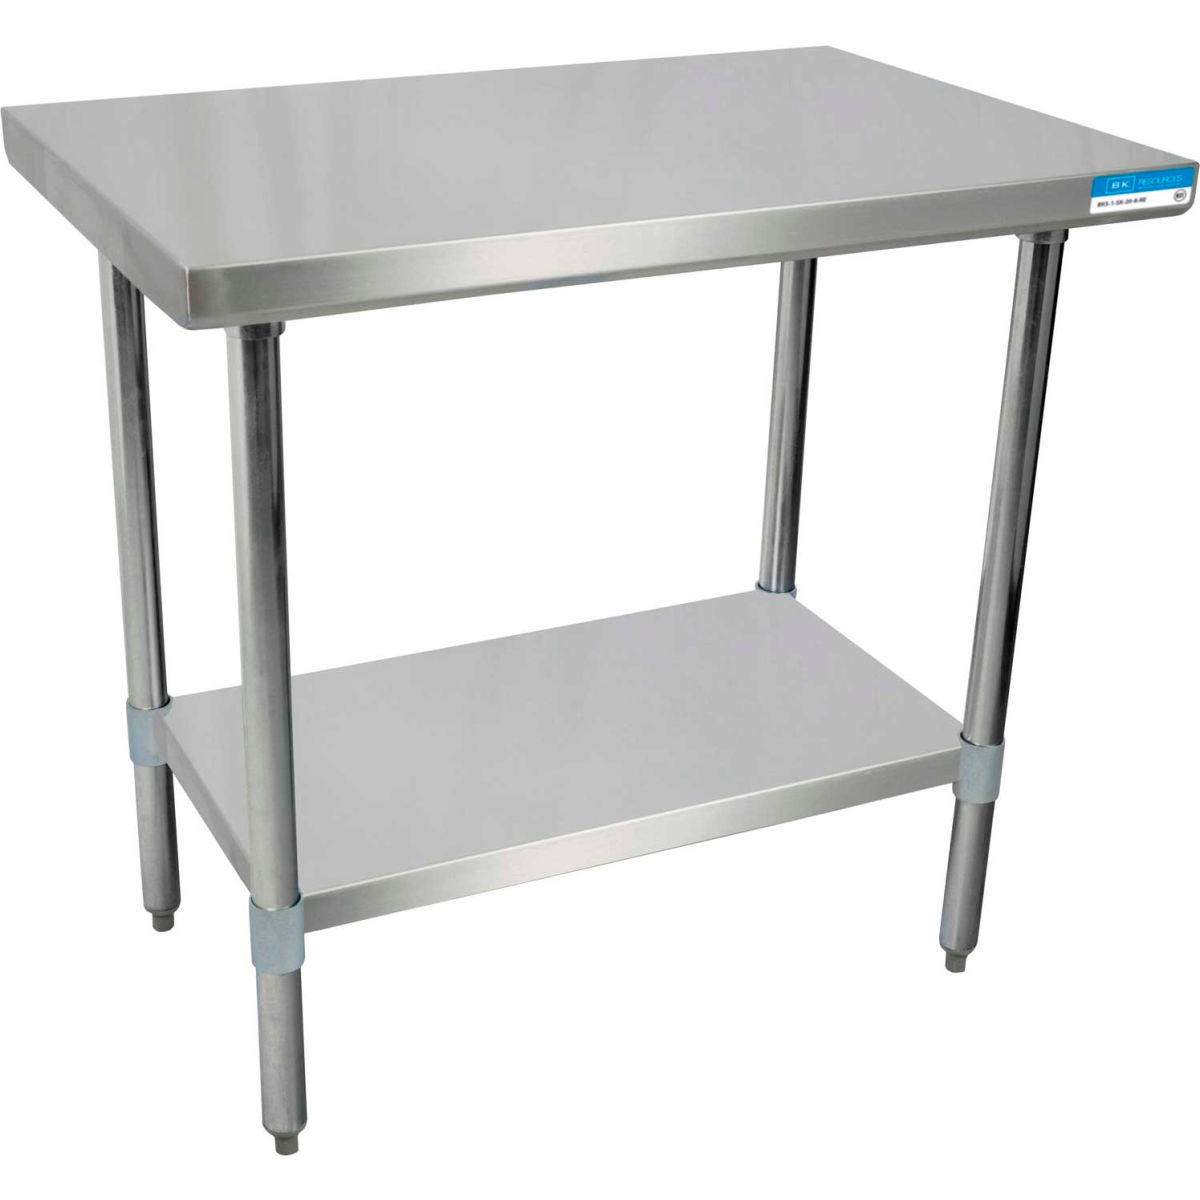 Picture of BK Resources B0899554 18 Gauge 430 Series Stainless Workbench with Adjustable Undershelf - 72 x 24 in.